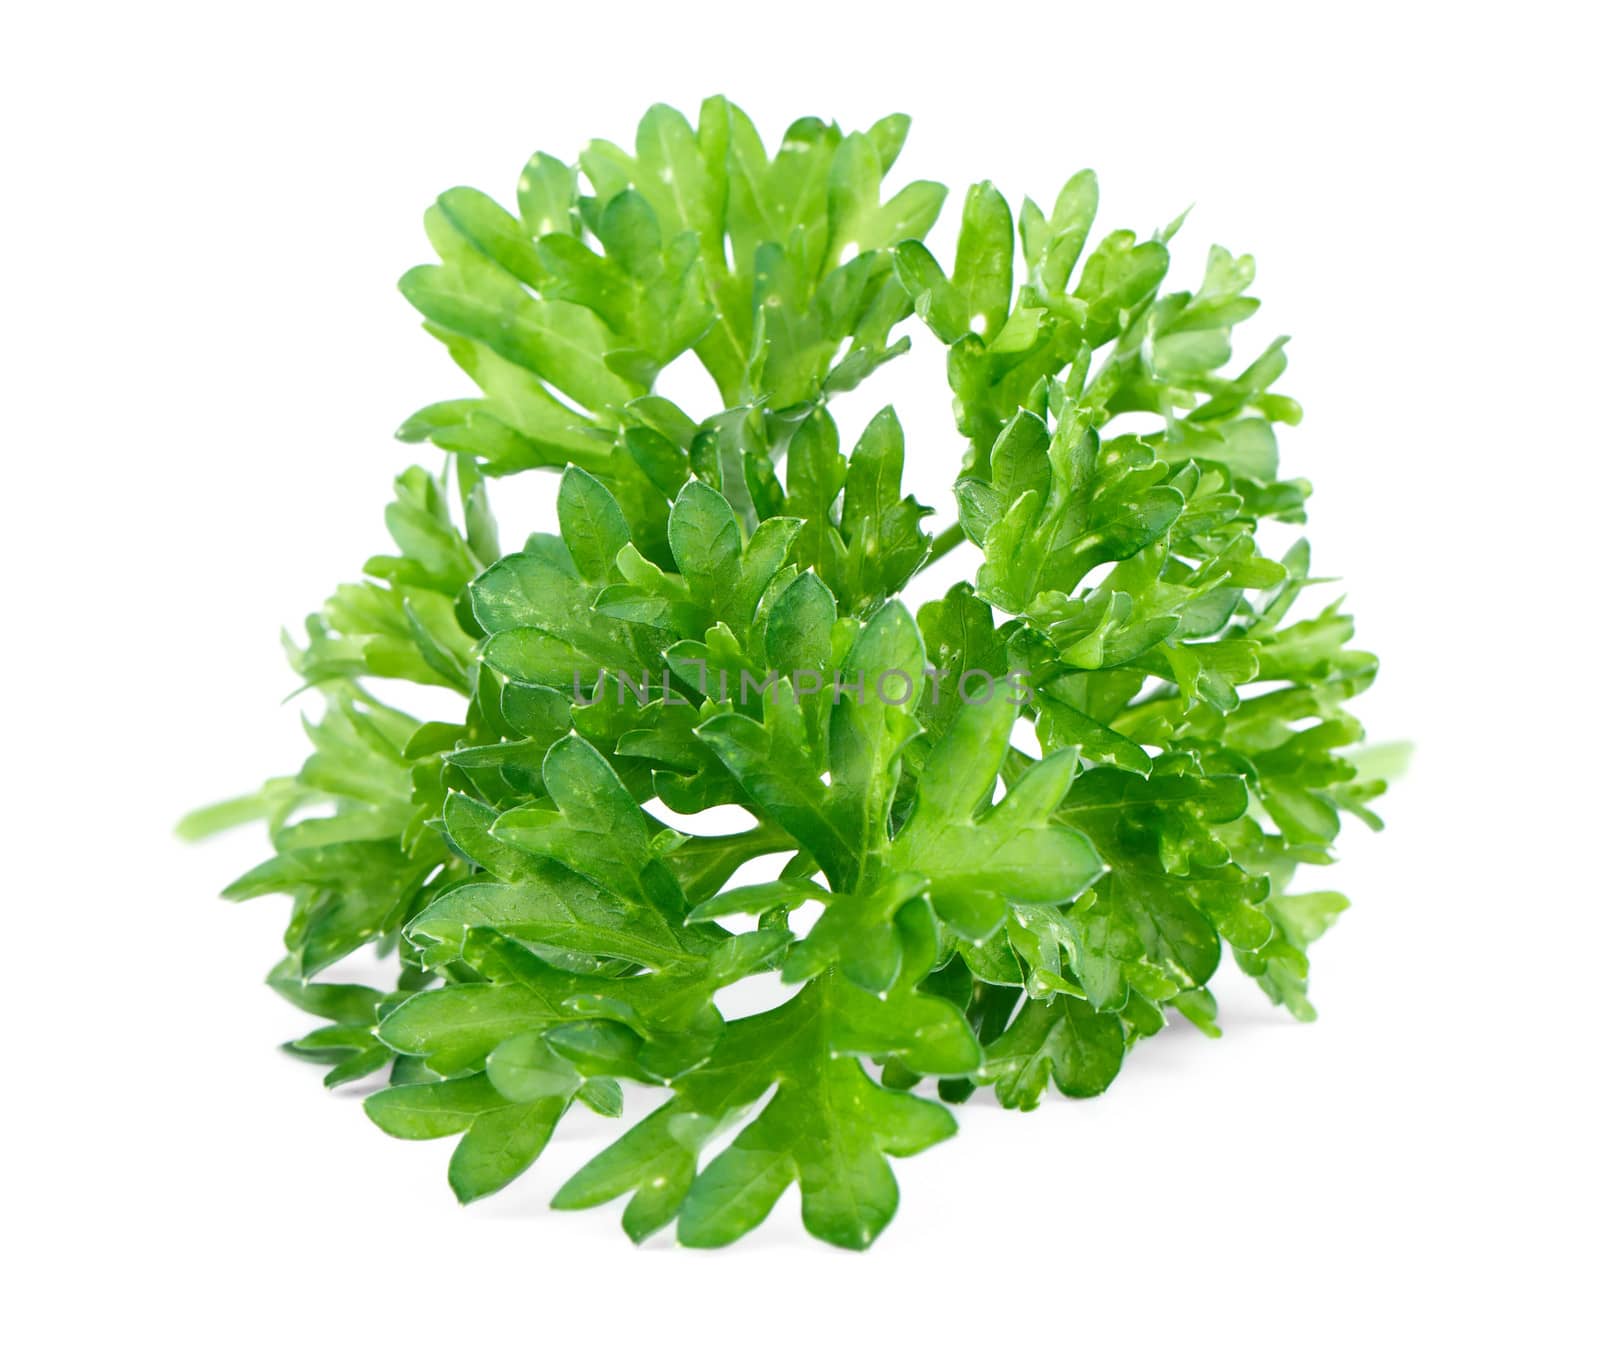 Green leaves of parsley isolated on white background